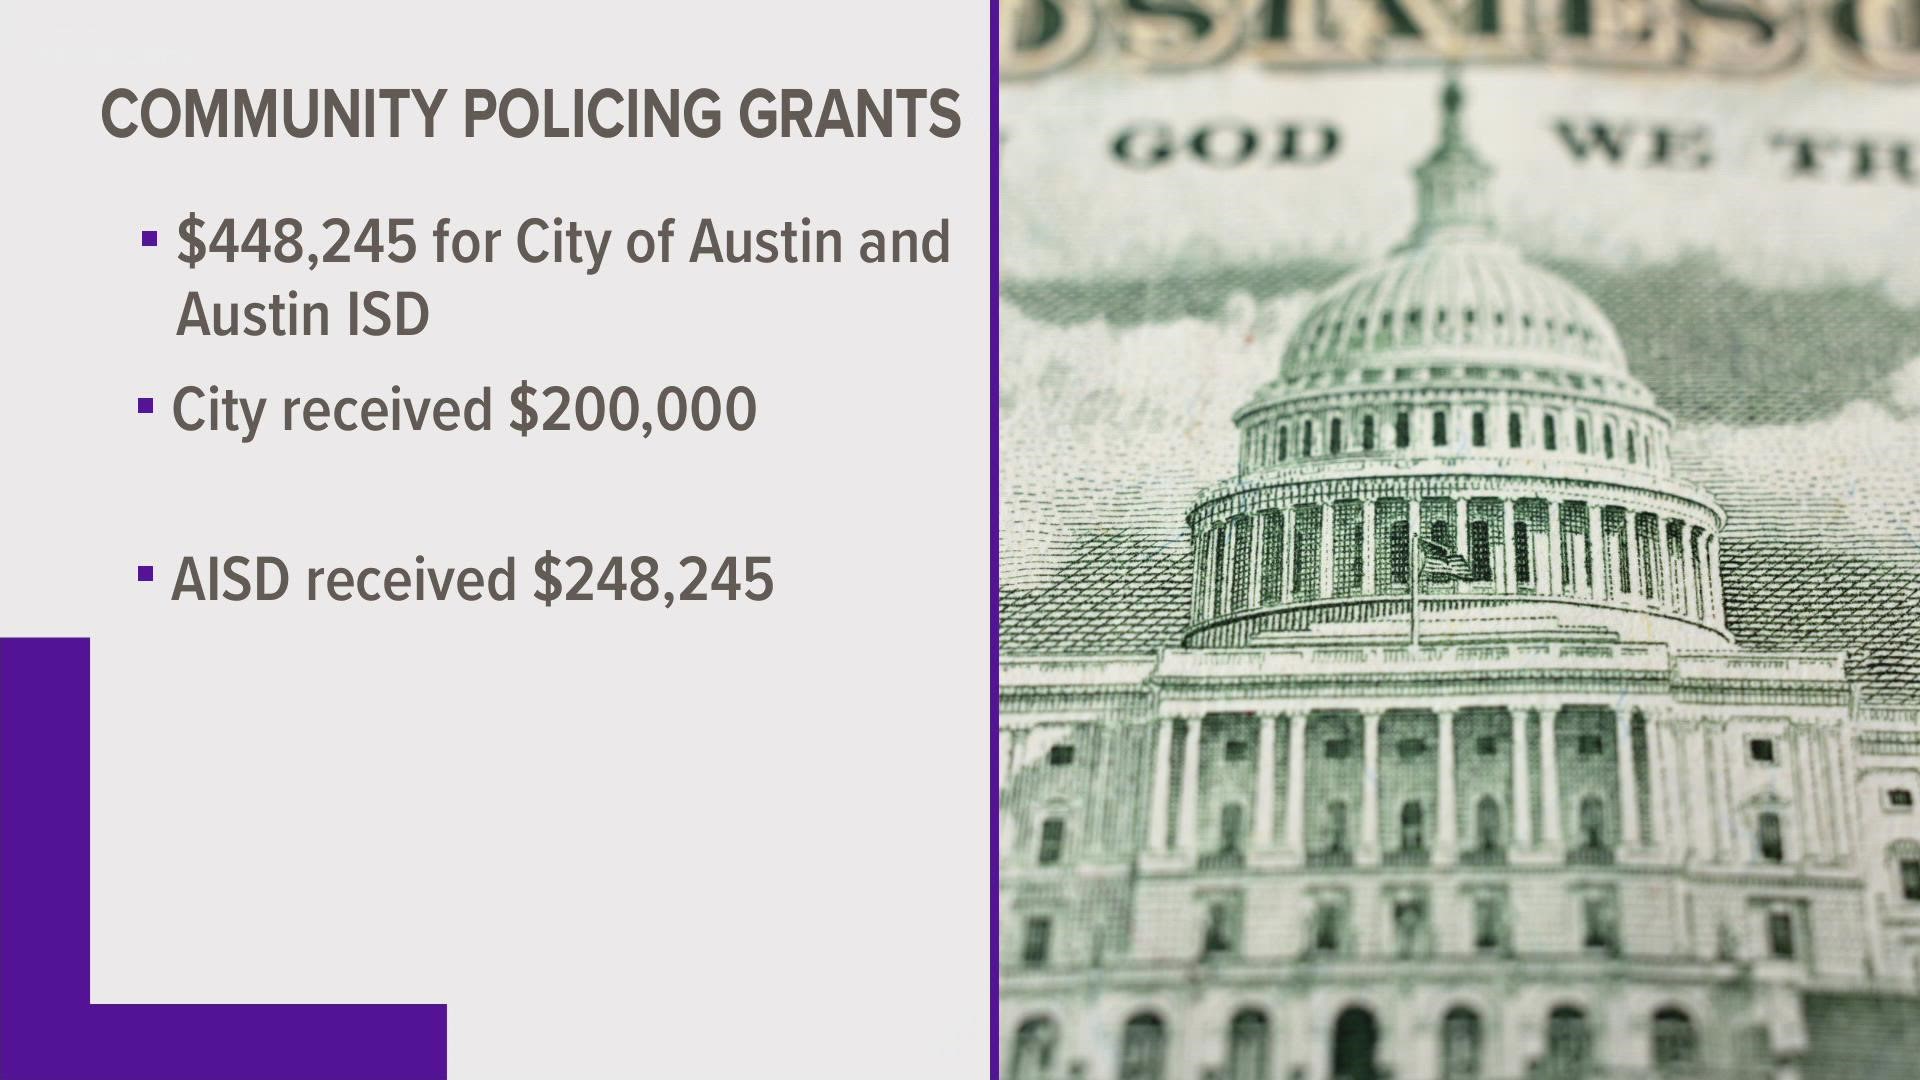 The City will receive $200,000, while Austin ISD will get the remaining $248,245.